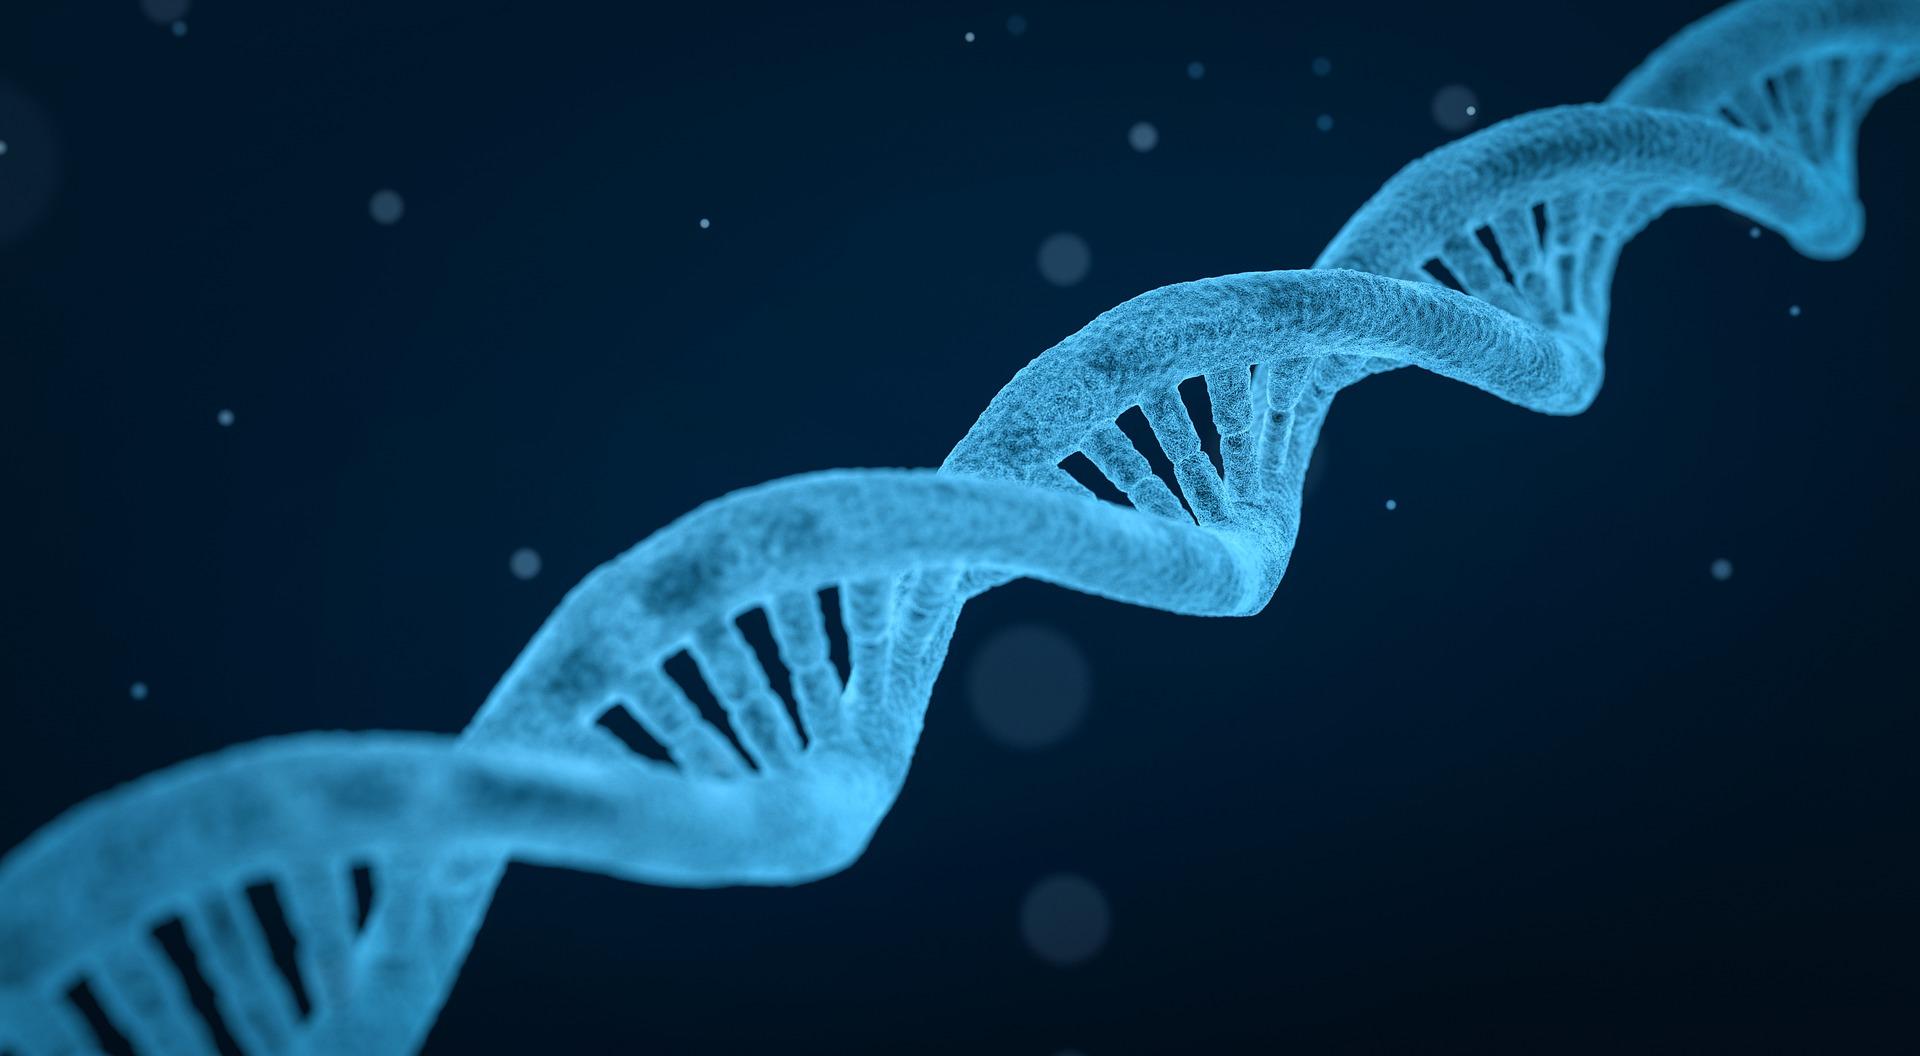 Blue double helix DNA strand on dark blue background